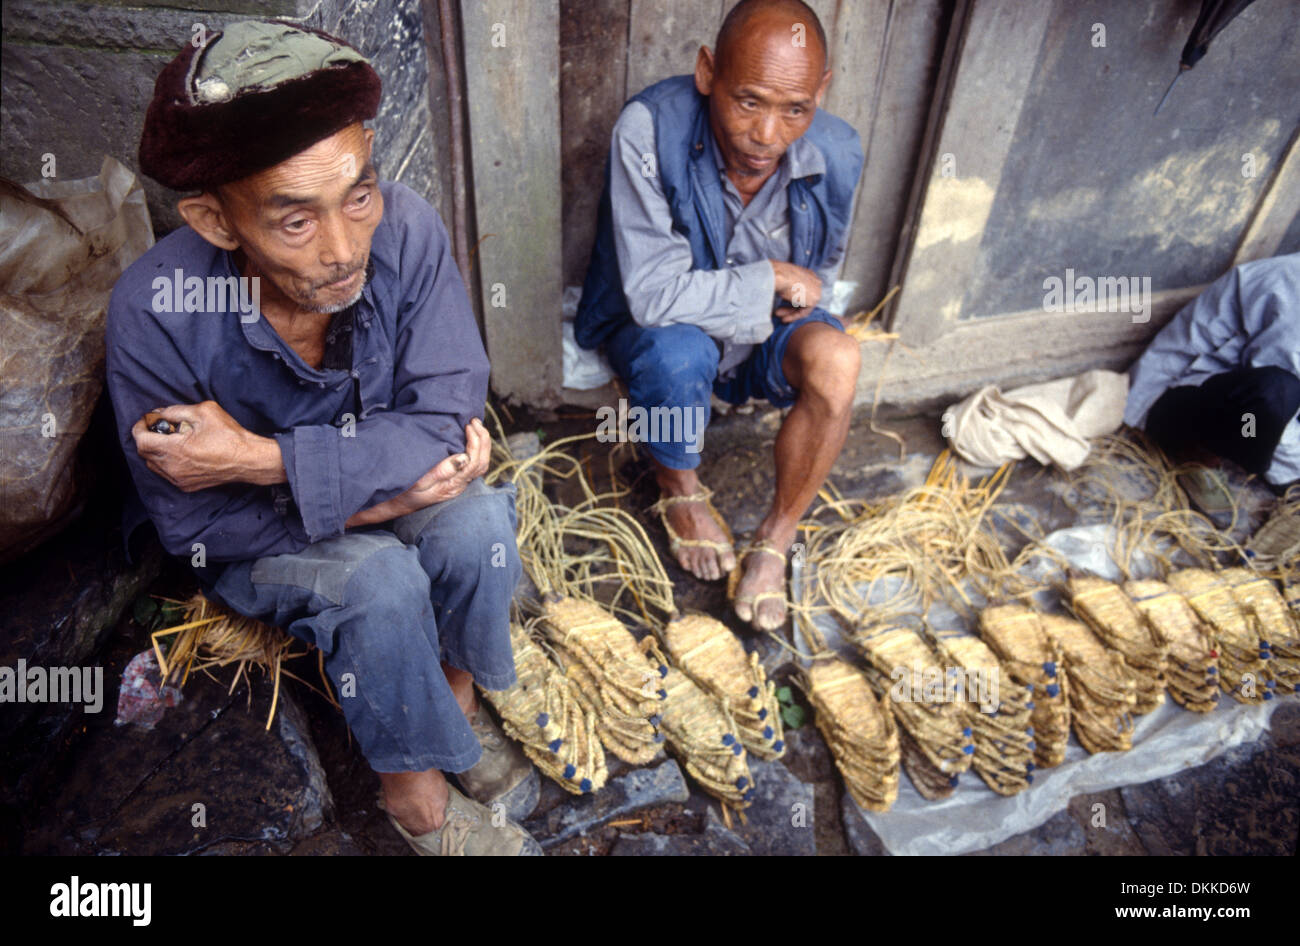 Two men selling straw shoes in a market in Hunan Province, China Stock Photo